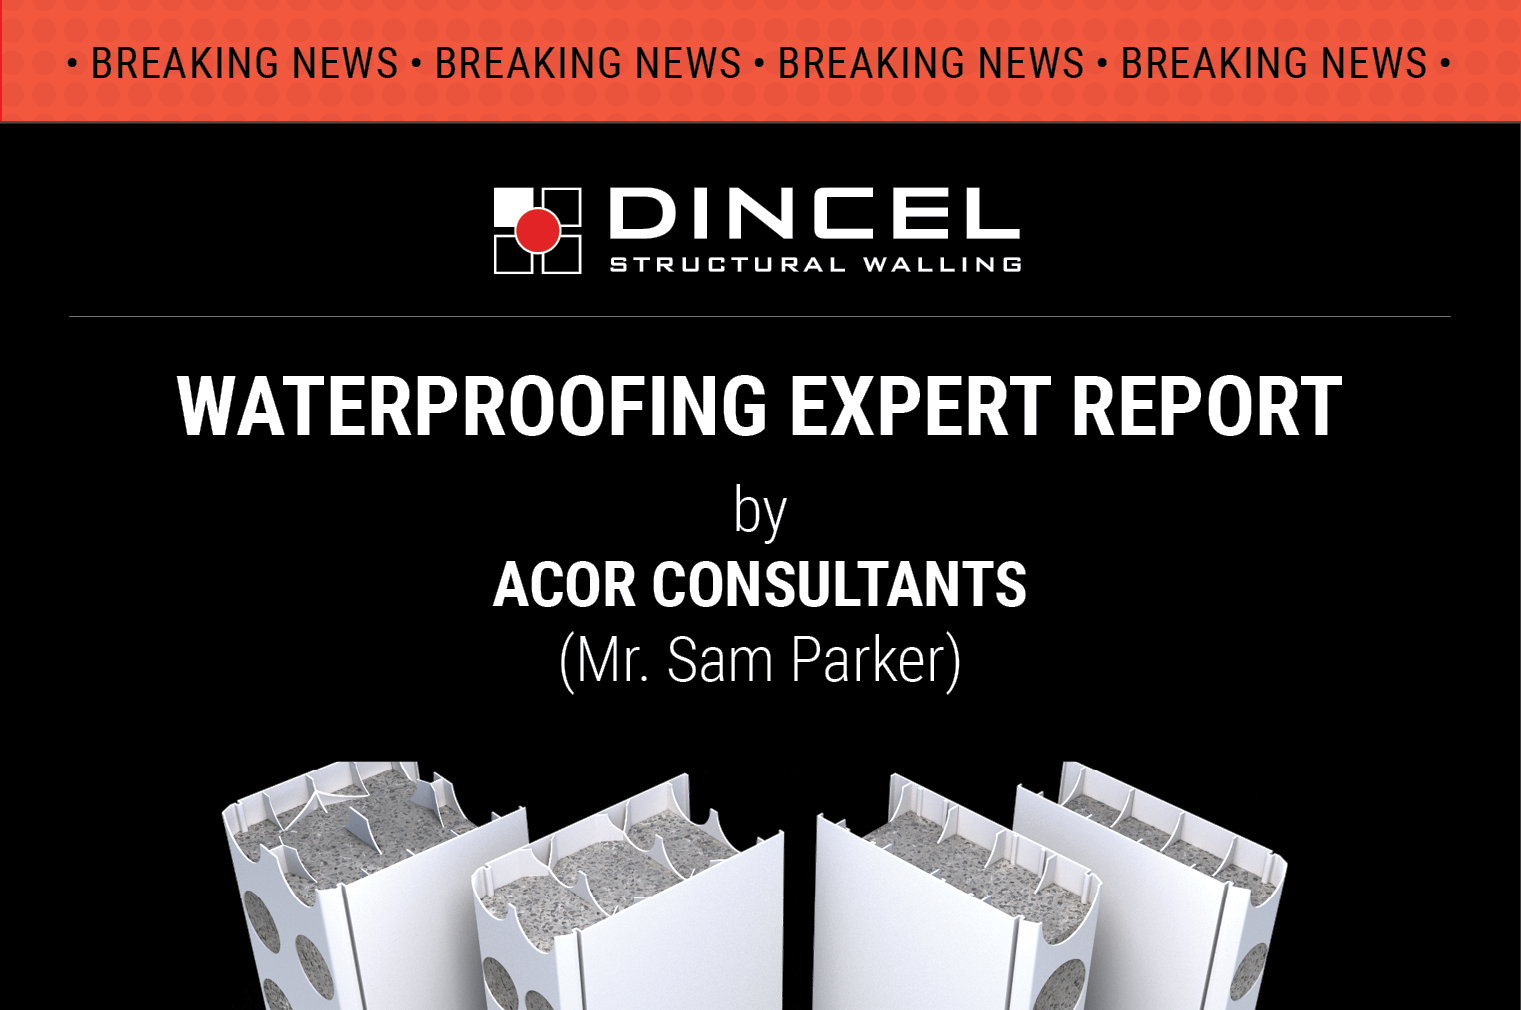 Following an extensive third-party peer-review process, Dincel is pleased to share the findings of an independent report into the efficacy of its new waterproofing solution for basement walls using Dincel’s patented panels and accessories.